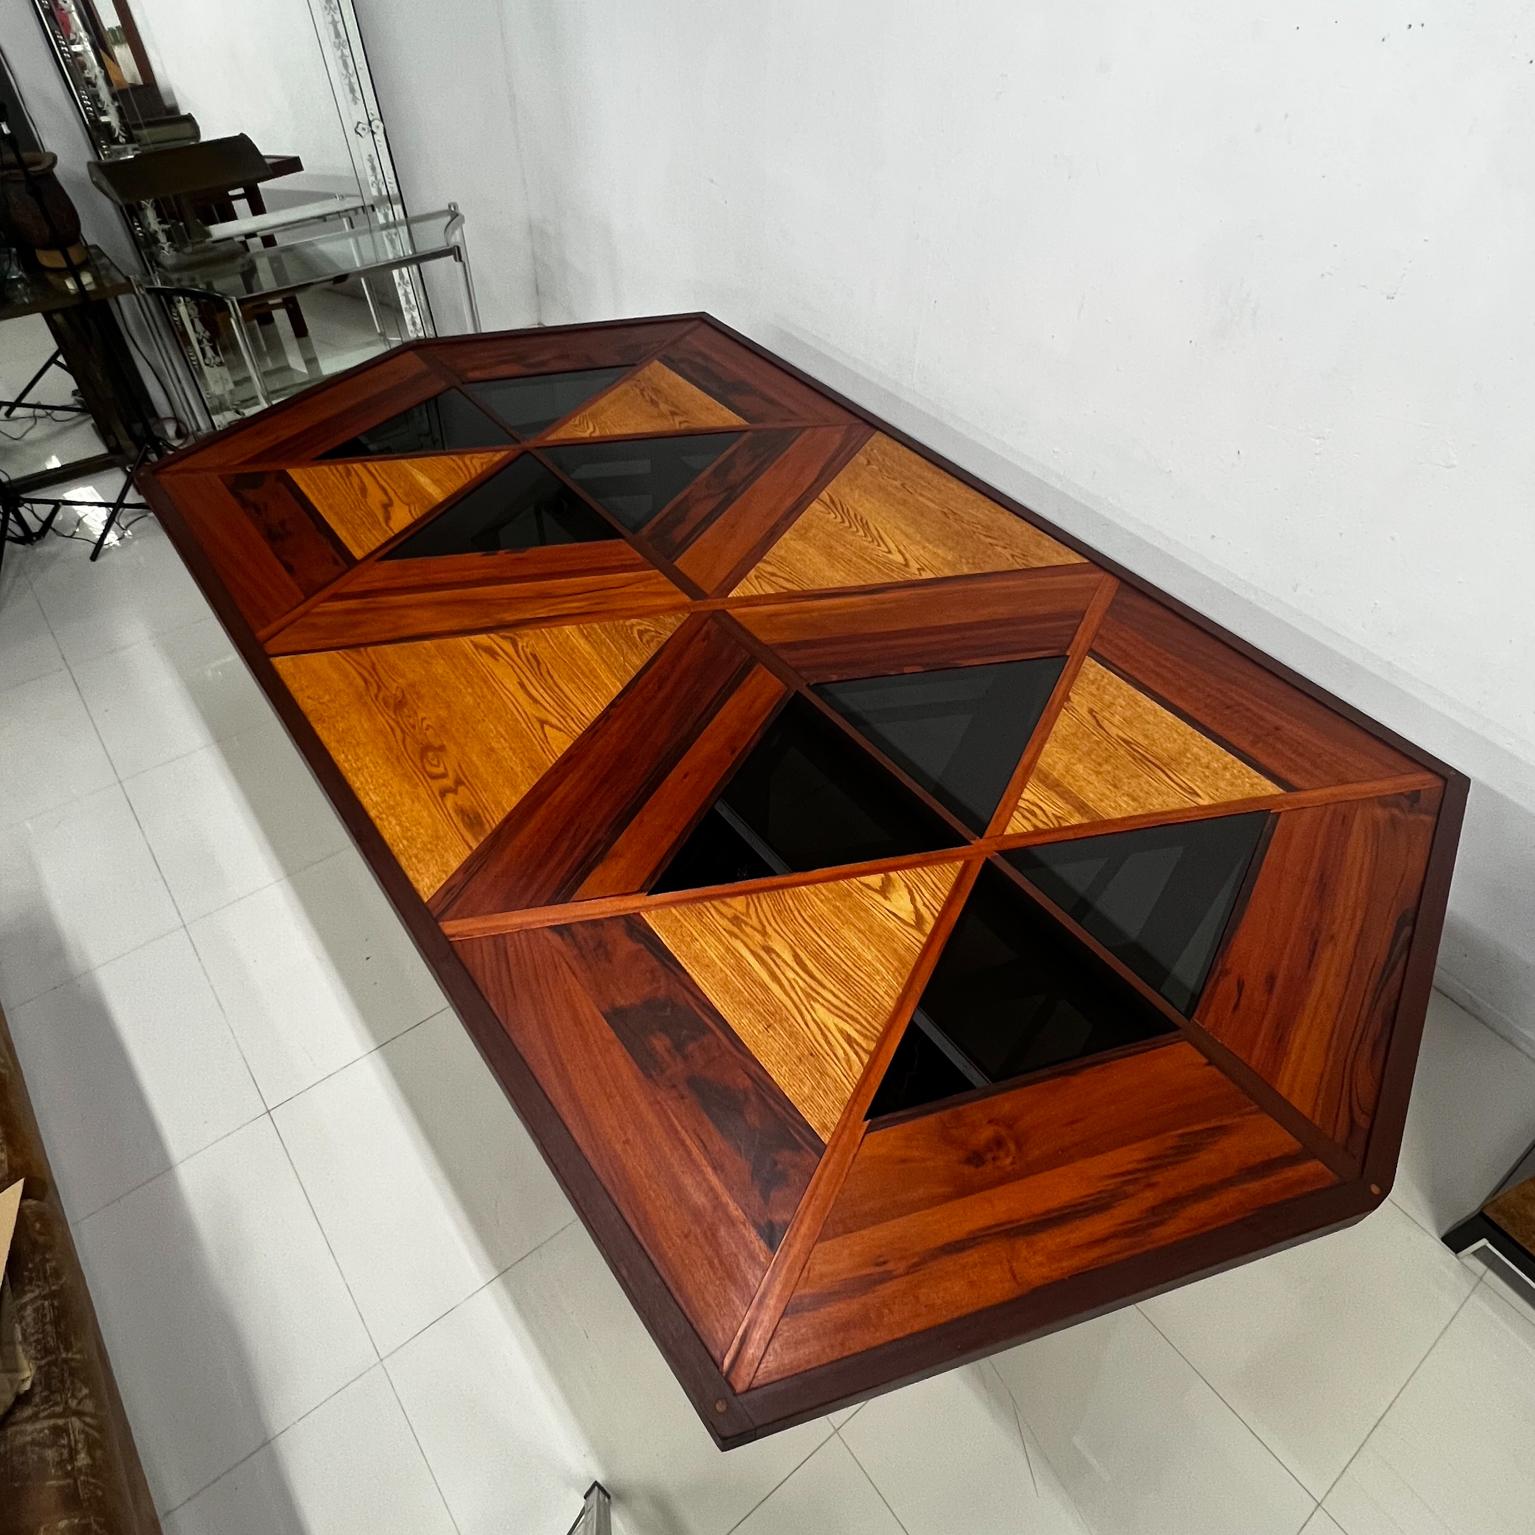 1960s Modernist Custom Design Dining Table Solid Wood Marquetry 
Elaborate wood inlays with a geometric design.
120 x 66 d x 32.5 tall knee clearance 30.25
Preowned original vintage presentation.
Refer to images recently provided.